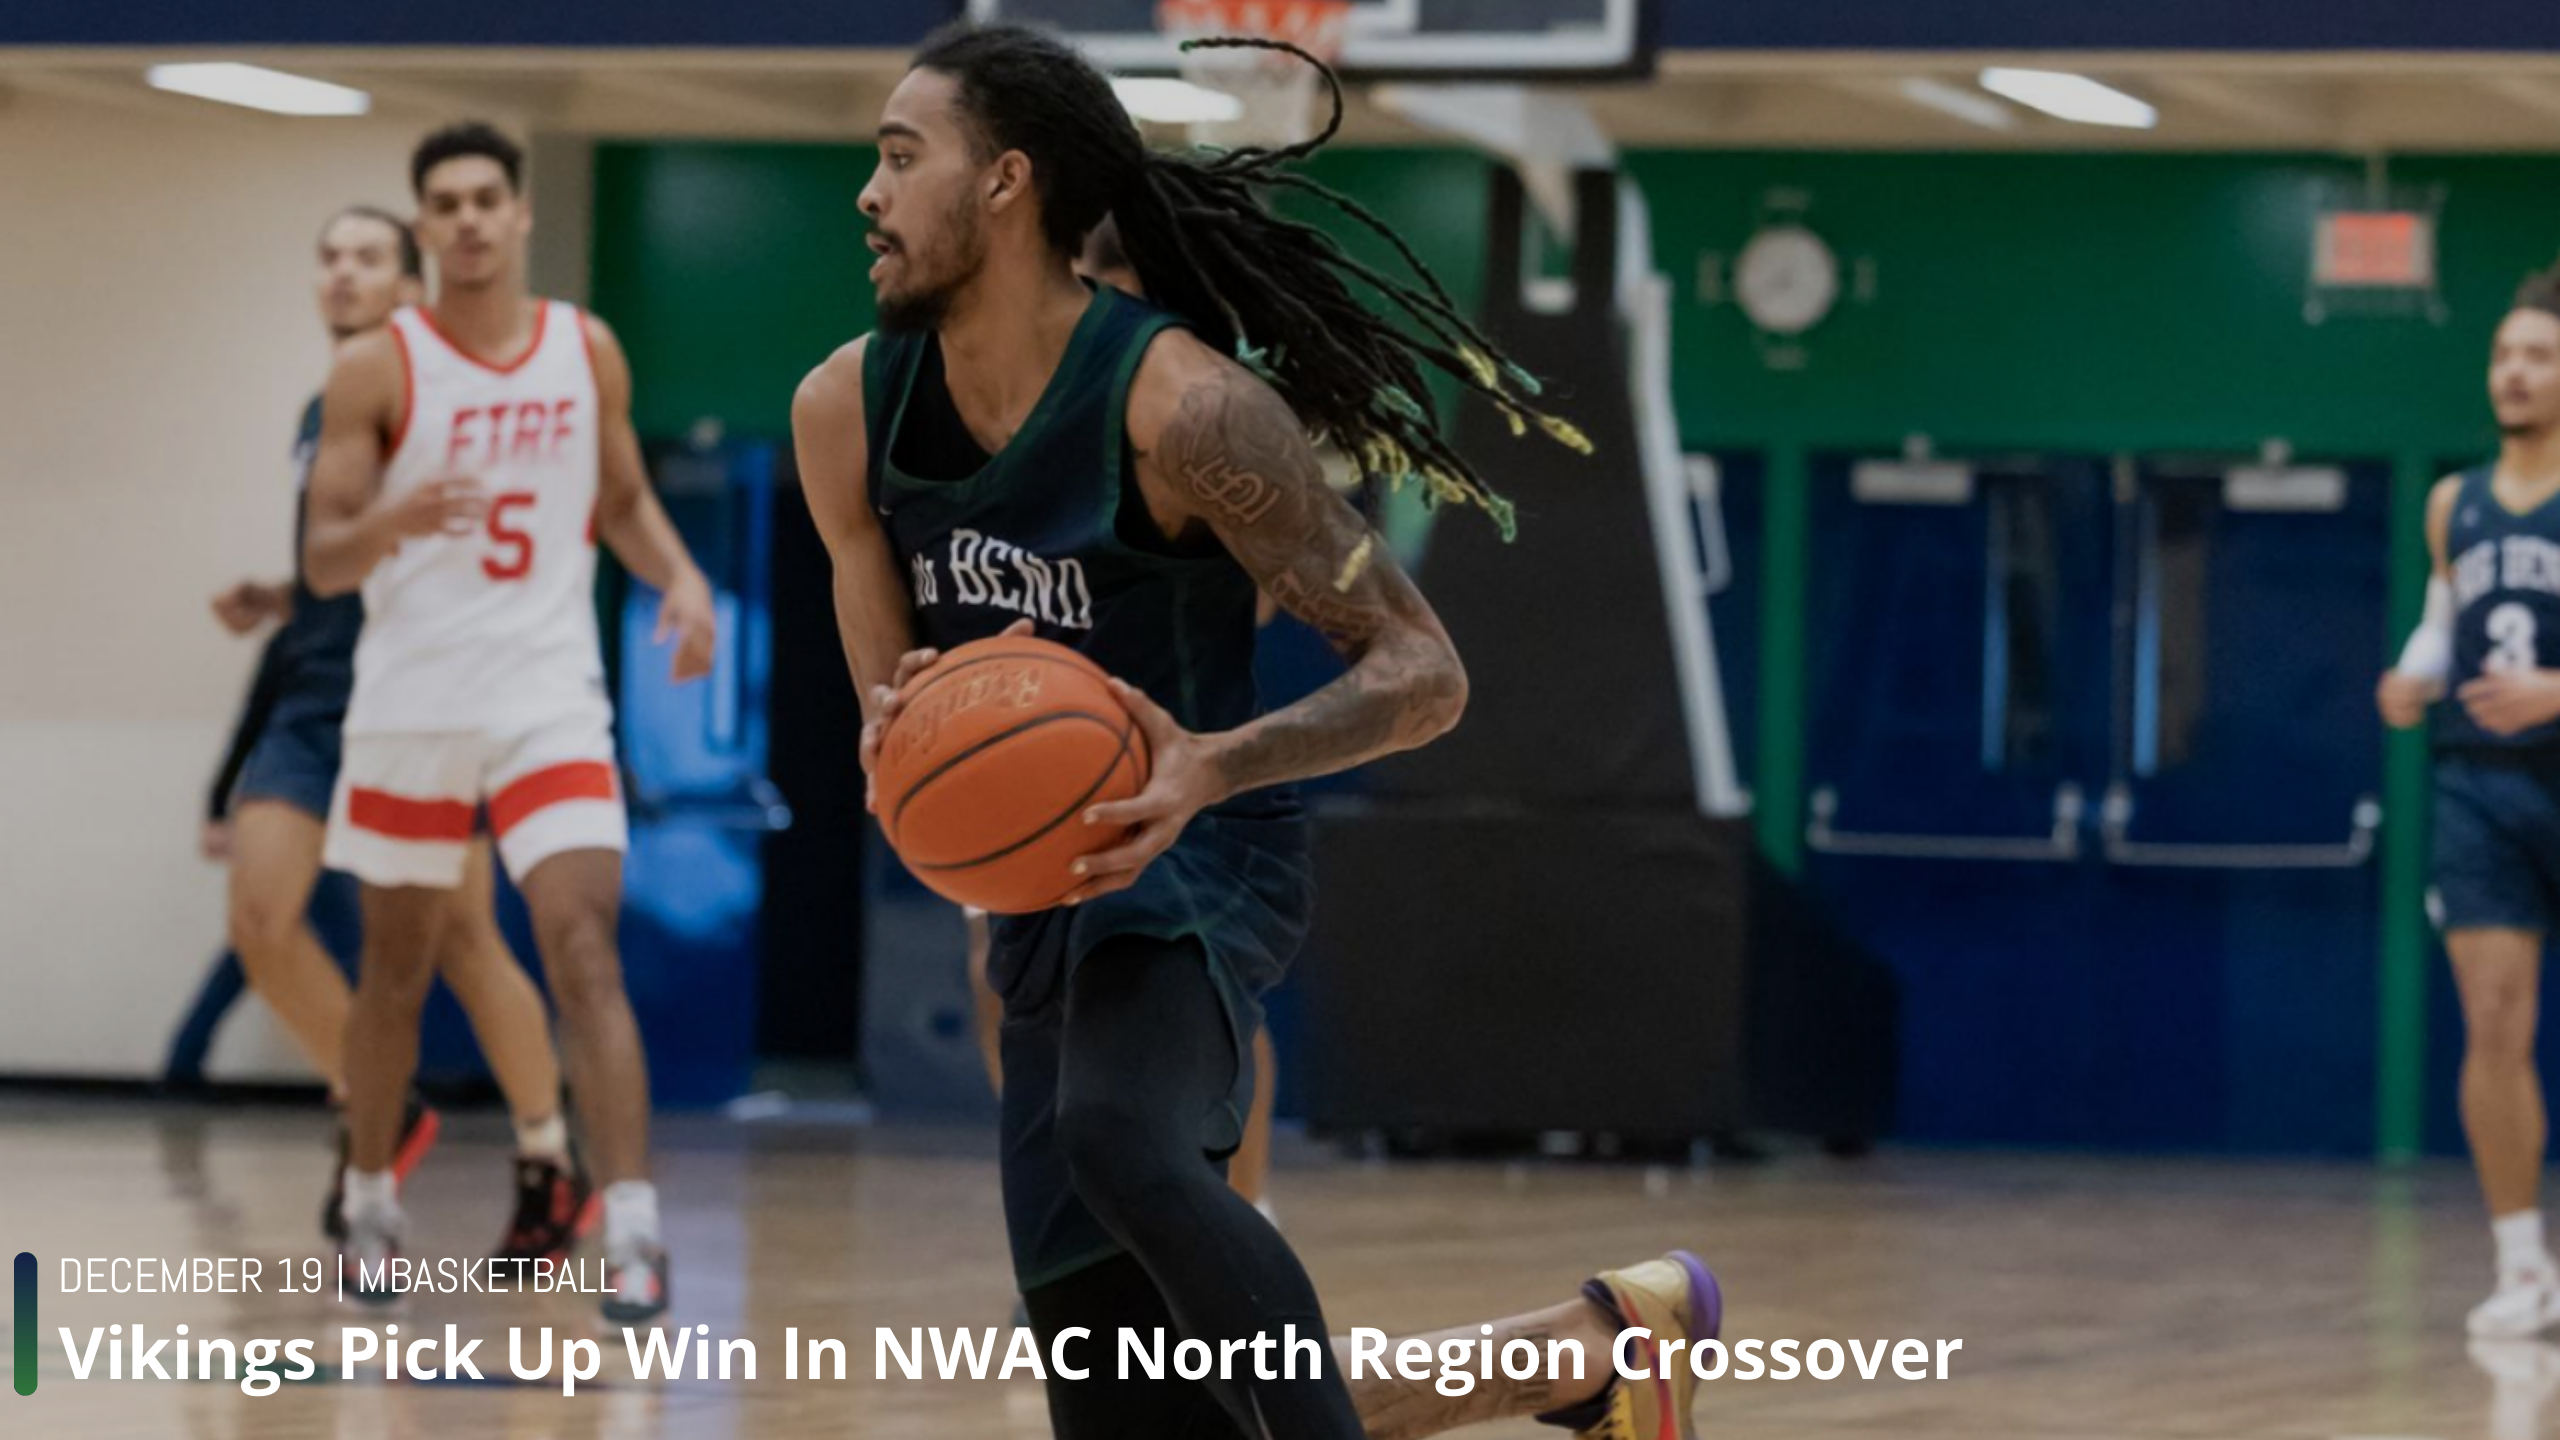 Vikings Pick Up Win In NWAC North Region Crossover